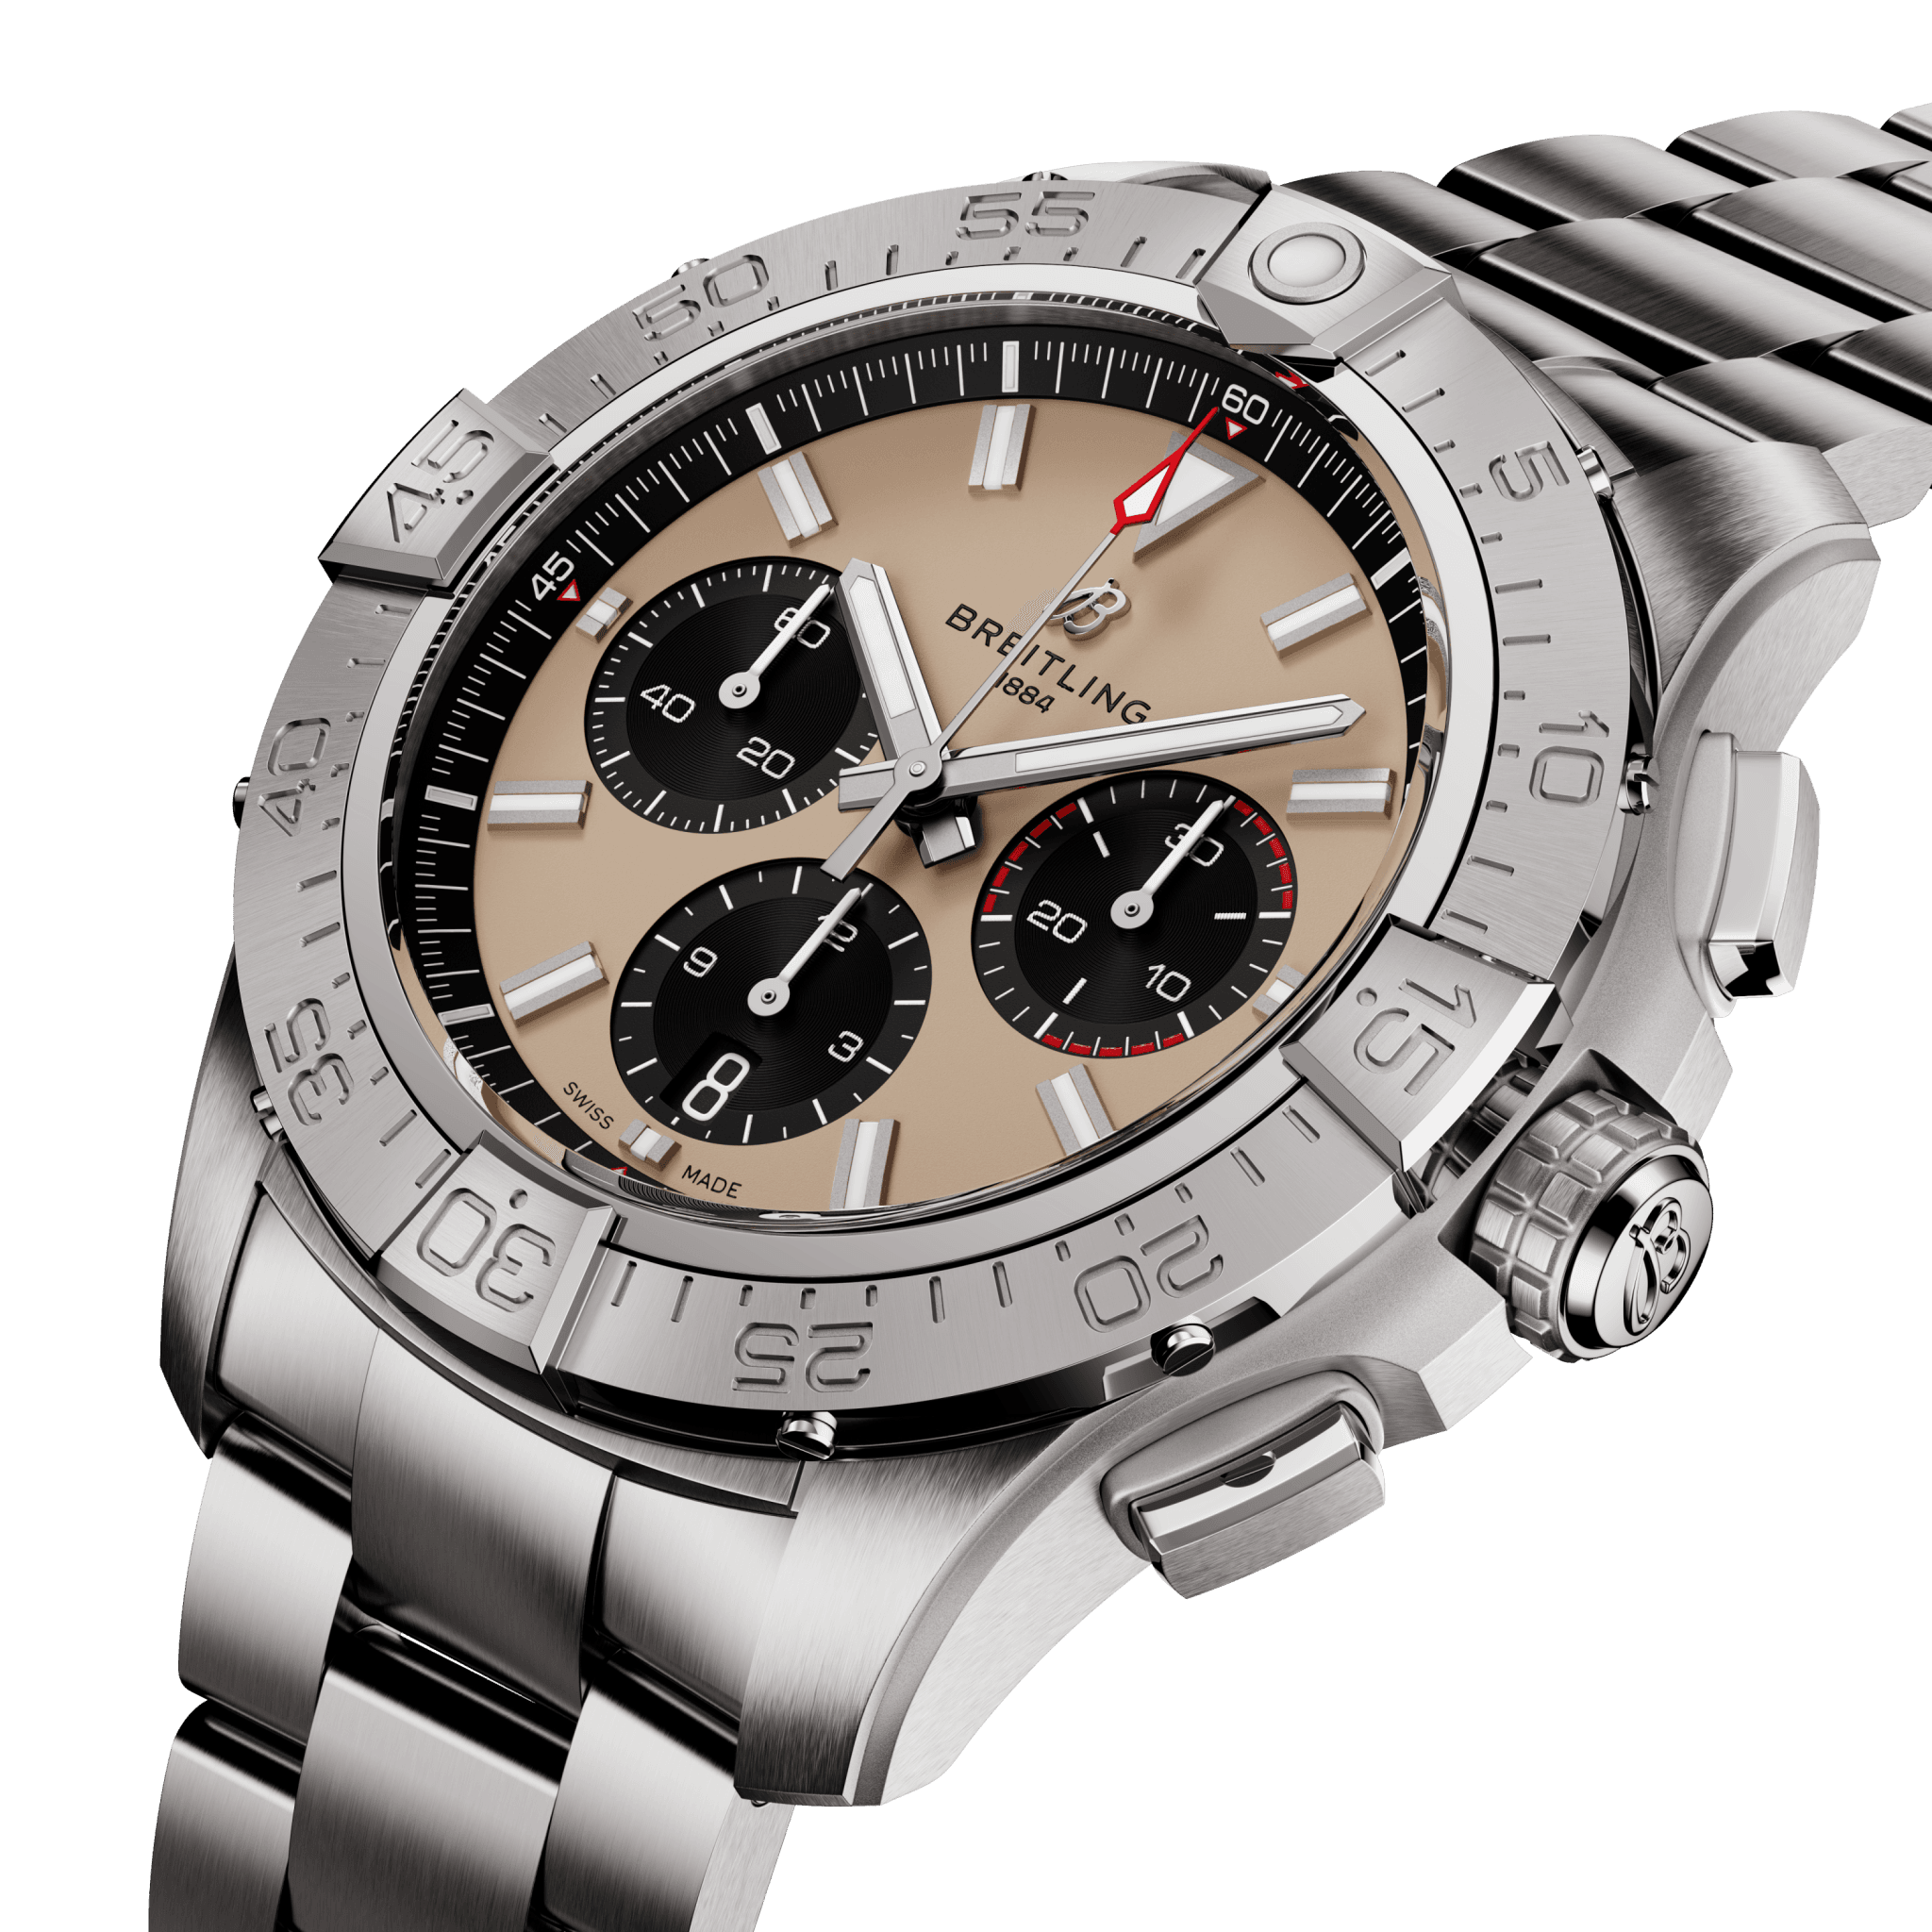 BREITLING AVENGER B01 CHRONOGRAPH 44 AUTOMATIC 44 MM STAINLESS STEEL BEIGE